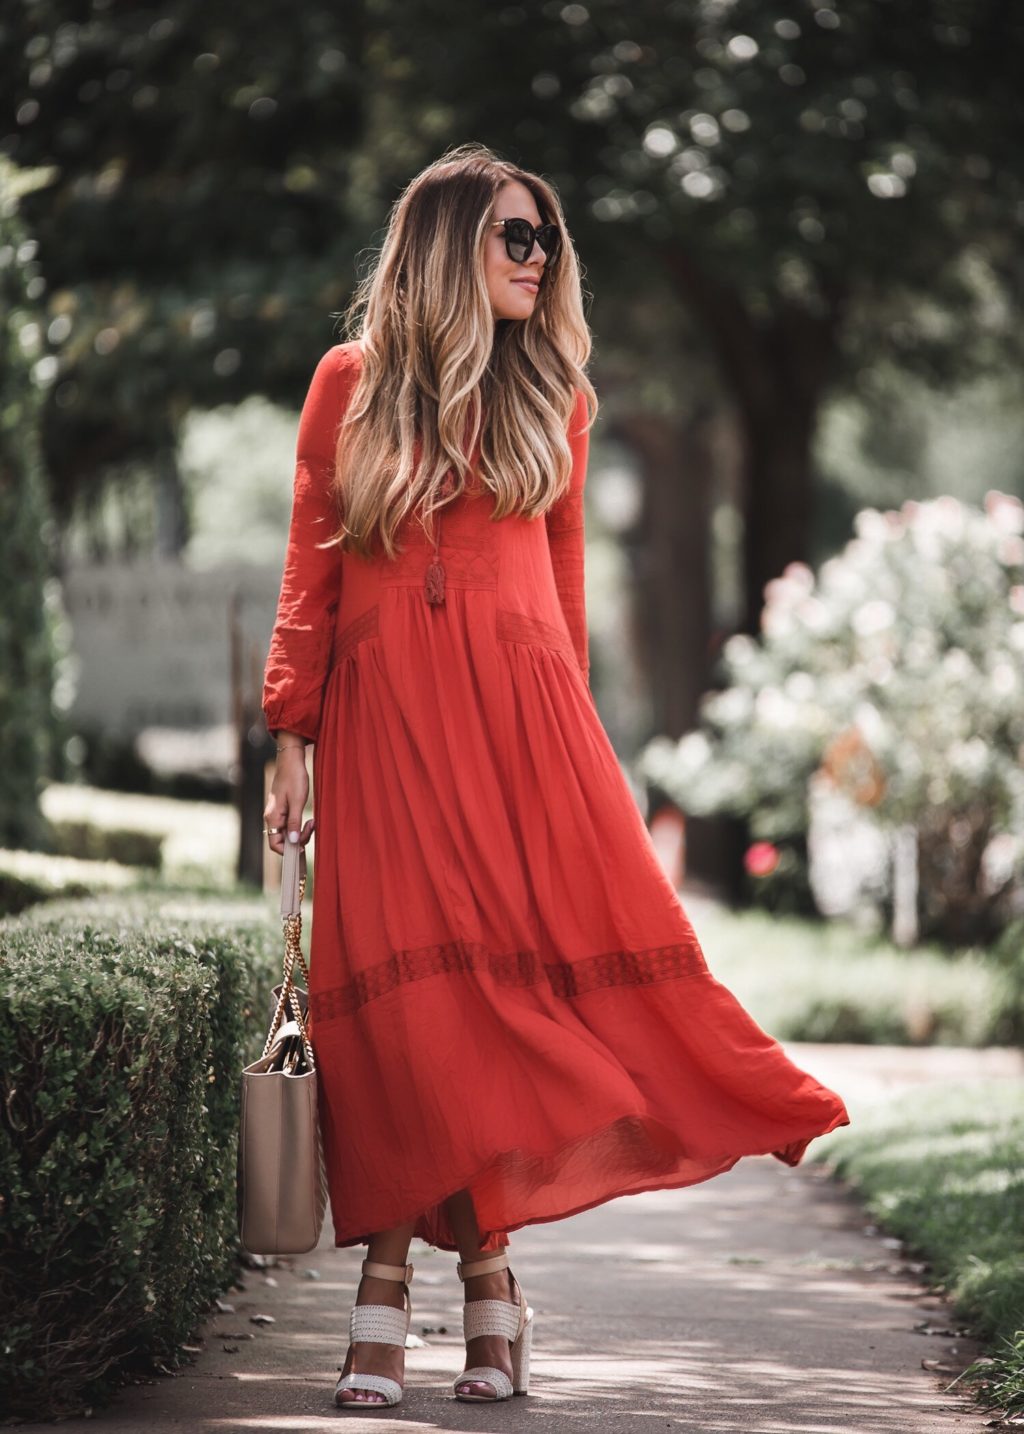 Red Summer Dress with Heels